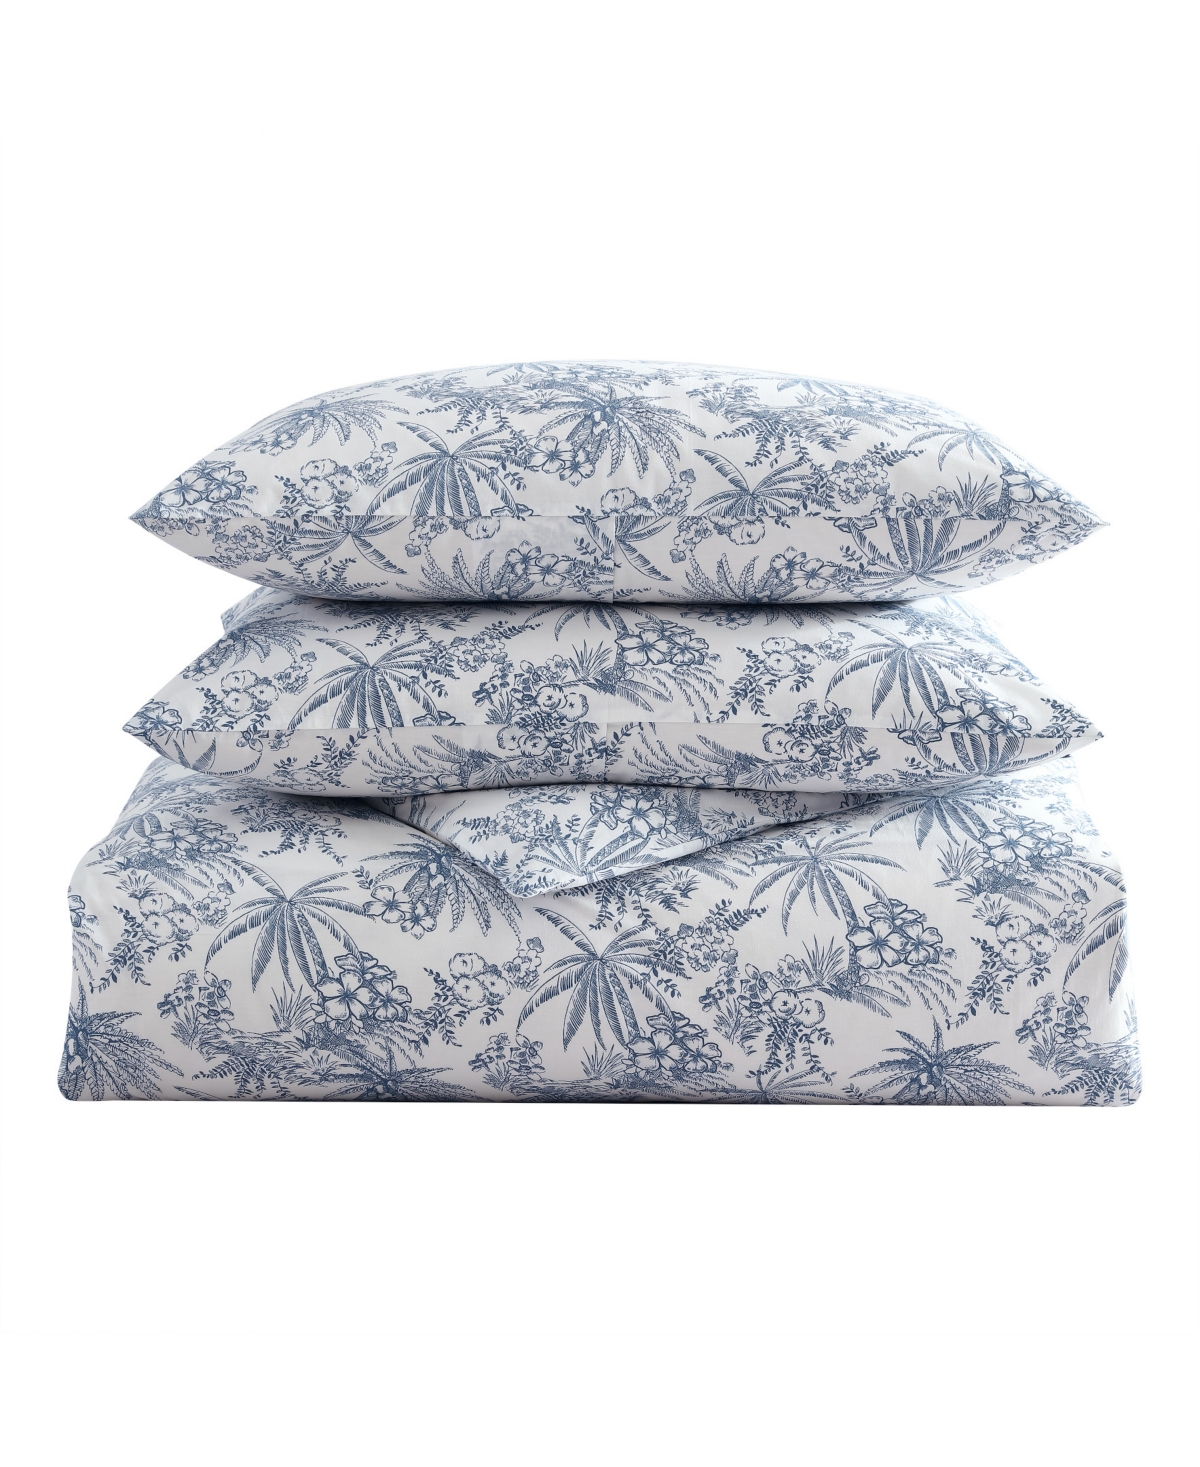 Tommy Bahama Home Pen And Ink Cotton 3 Piece Duvet Cover Set, King In Indigo